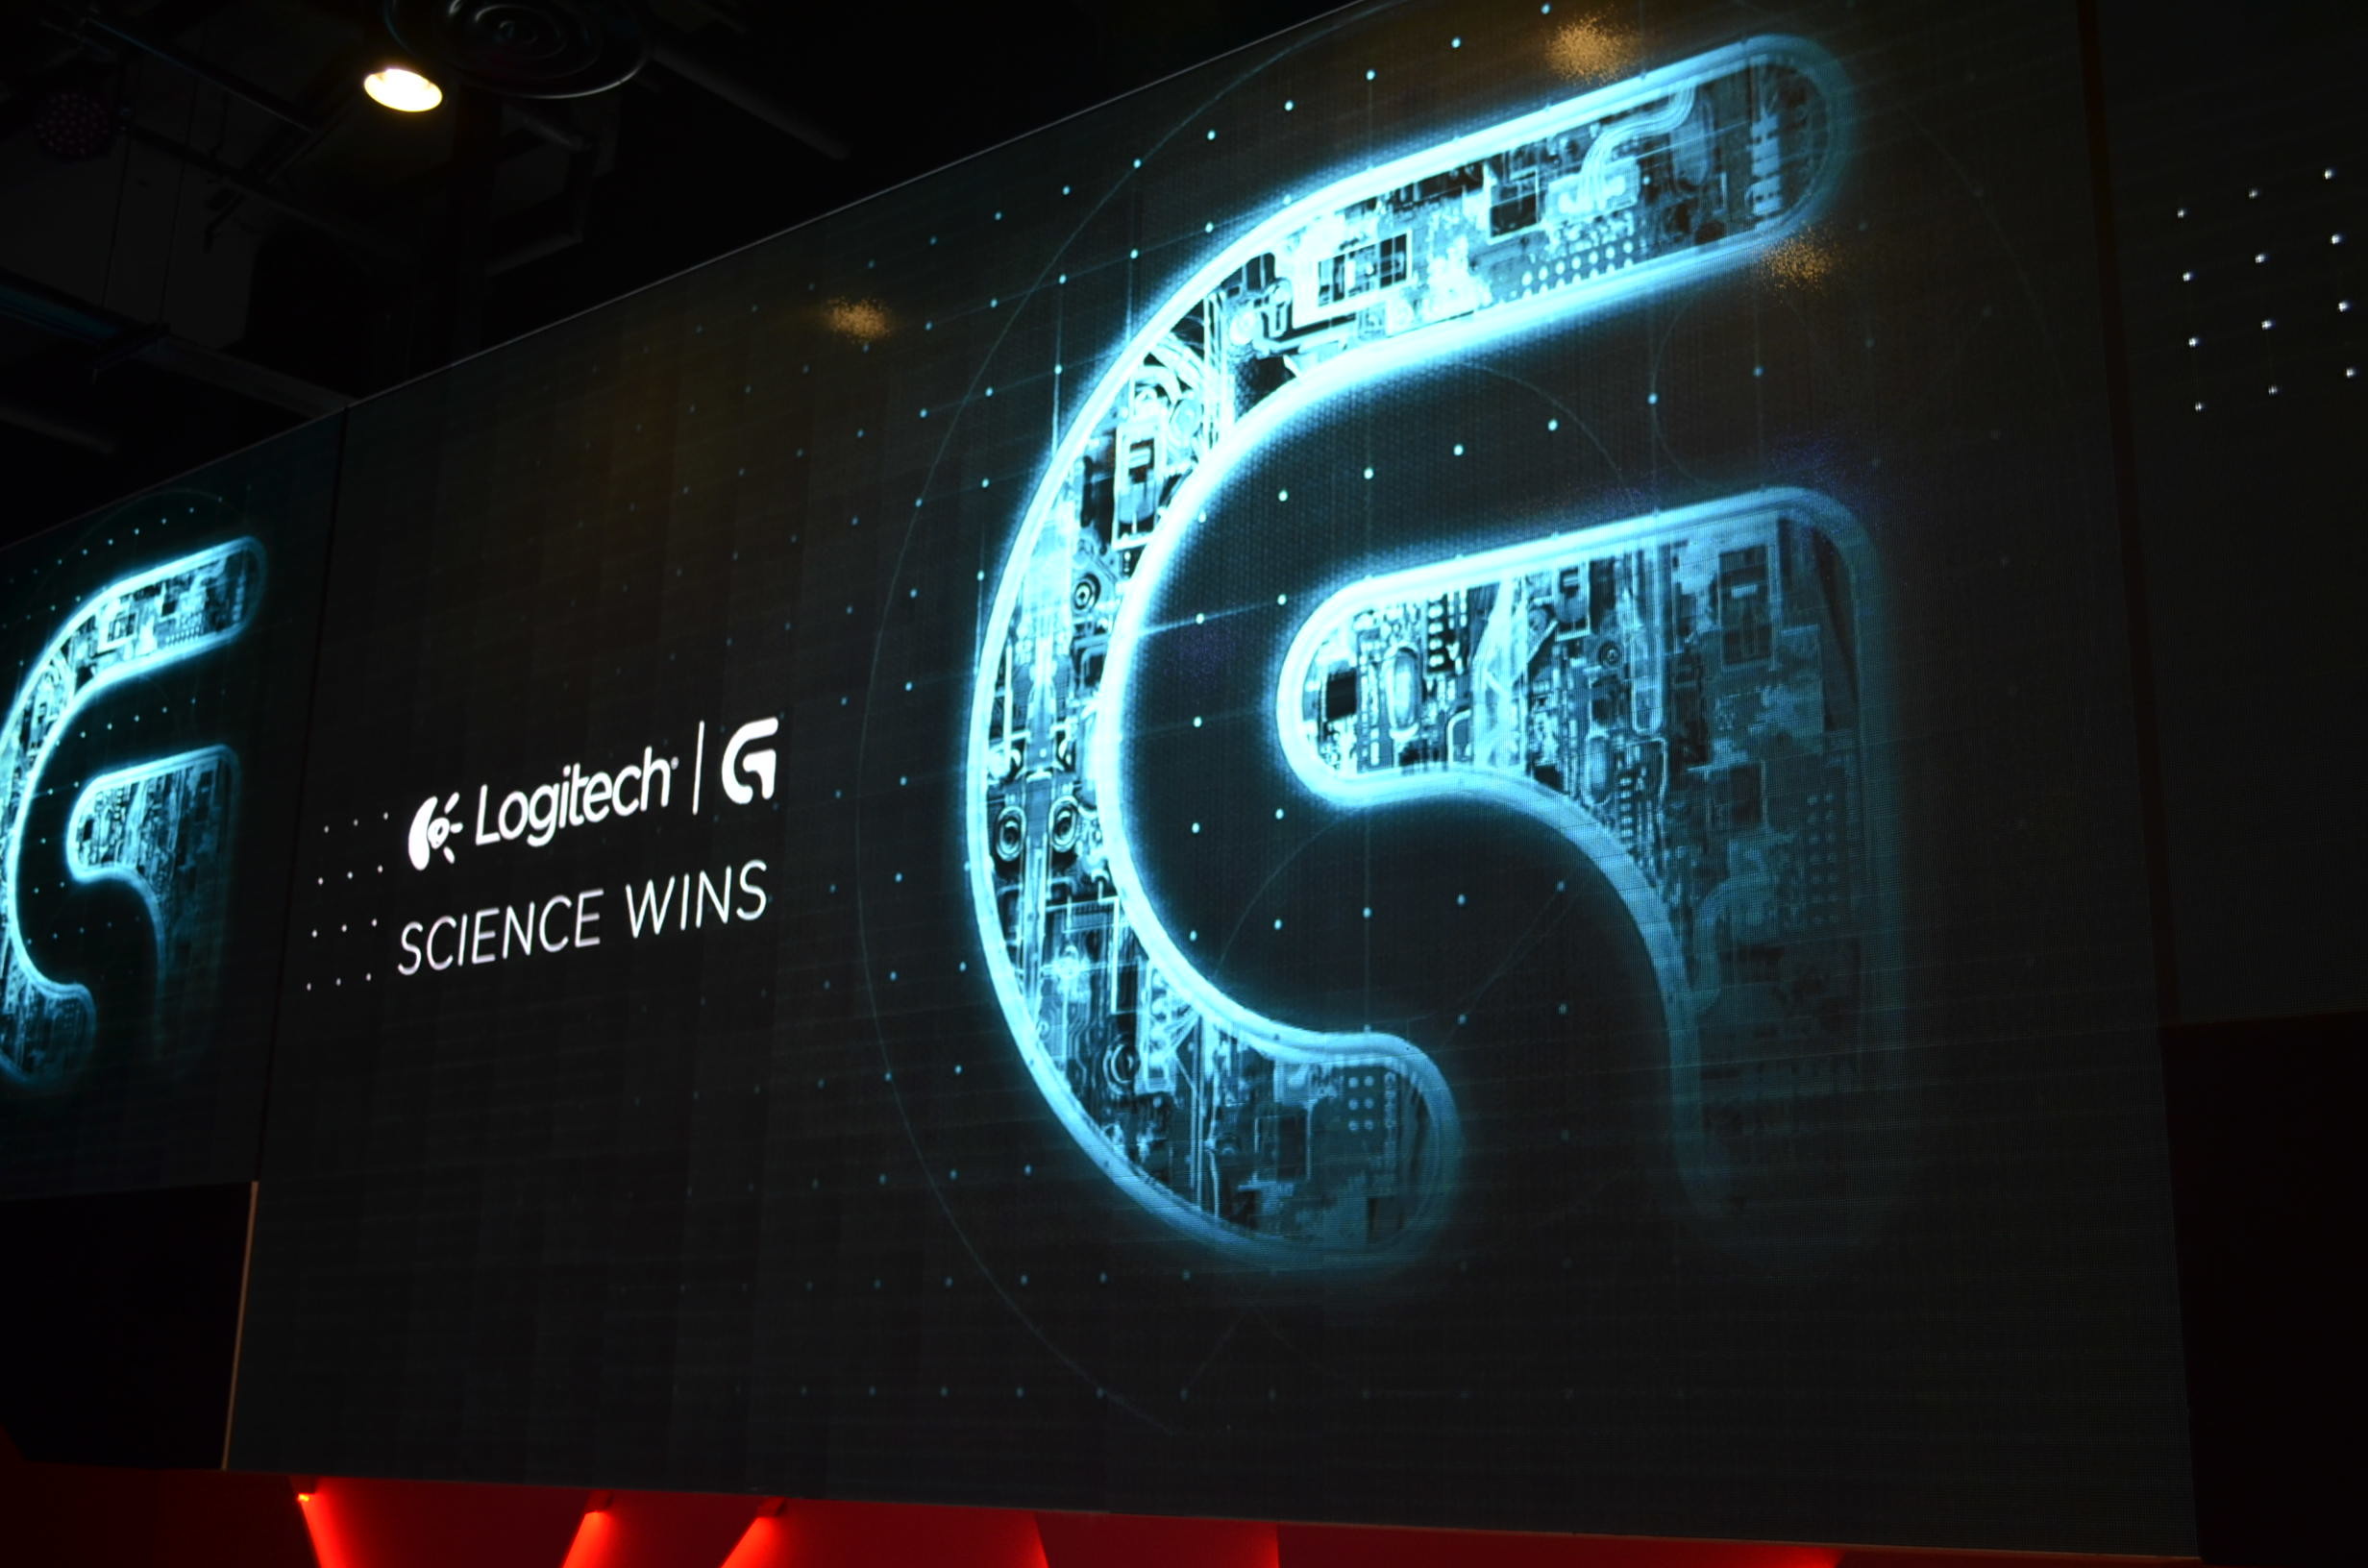 2464x1632 Logitech launches 8 new PC gaming products; 4 mouse, 2 keyboard and 2  headphone. The new tagline for their gaming products is “Science wins”.